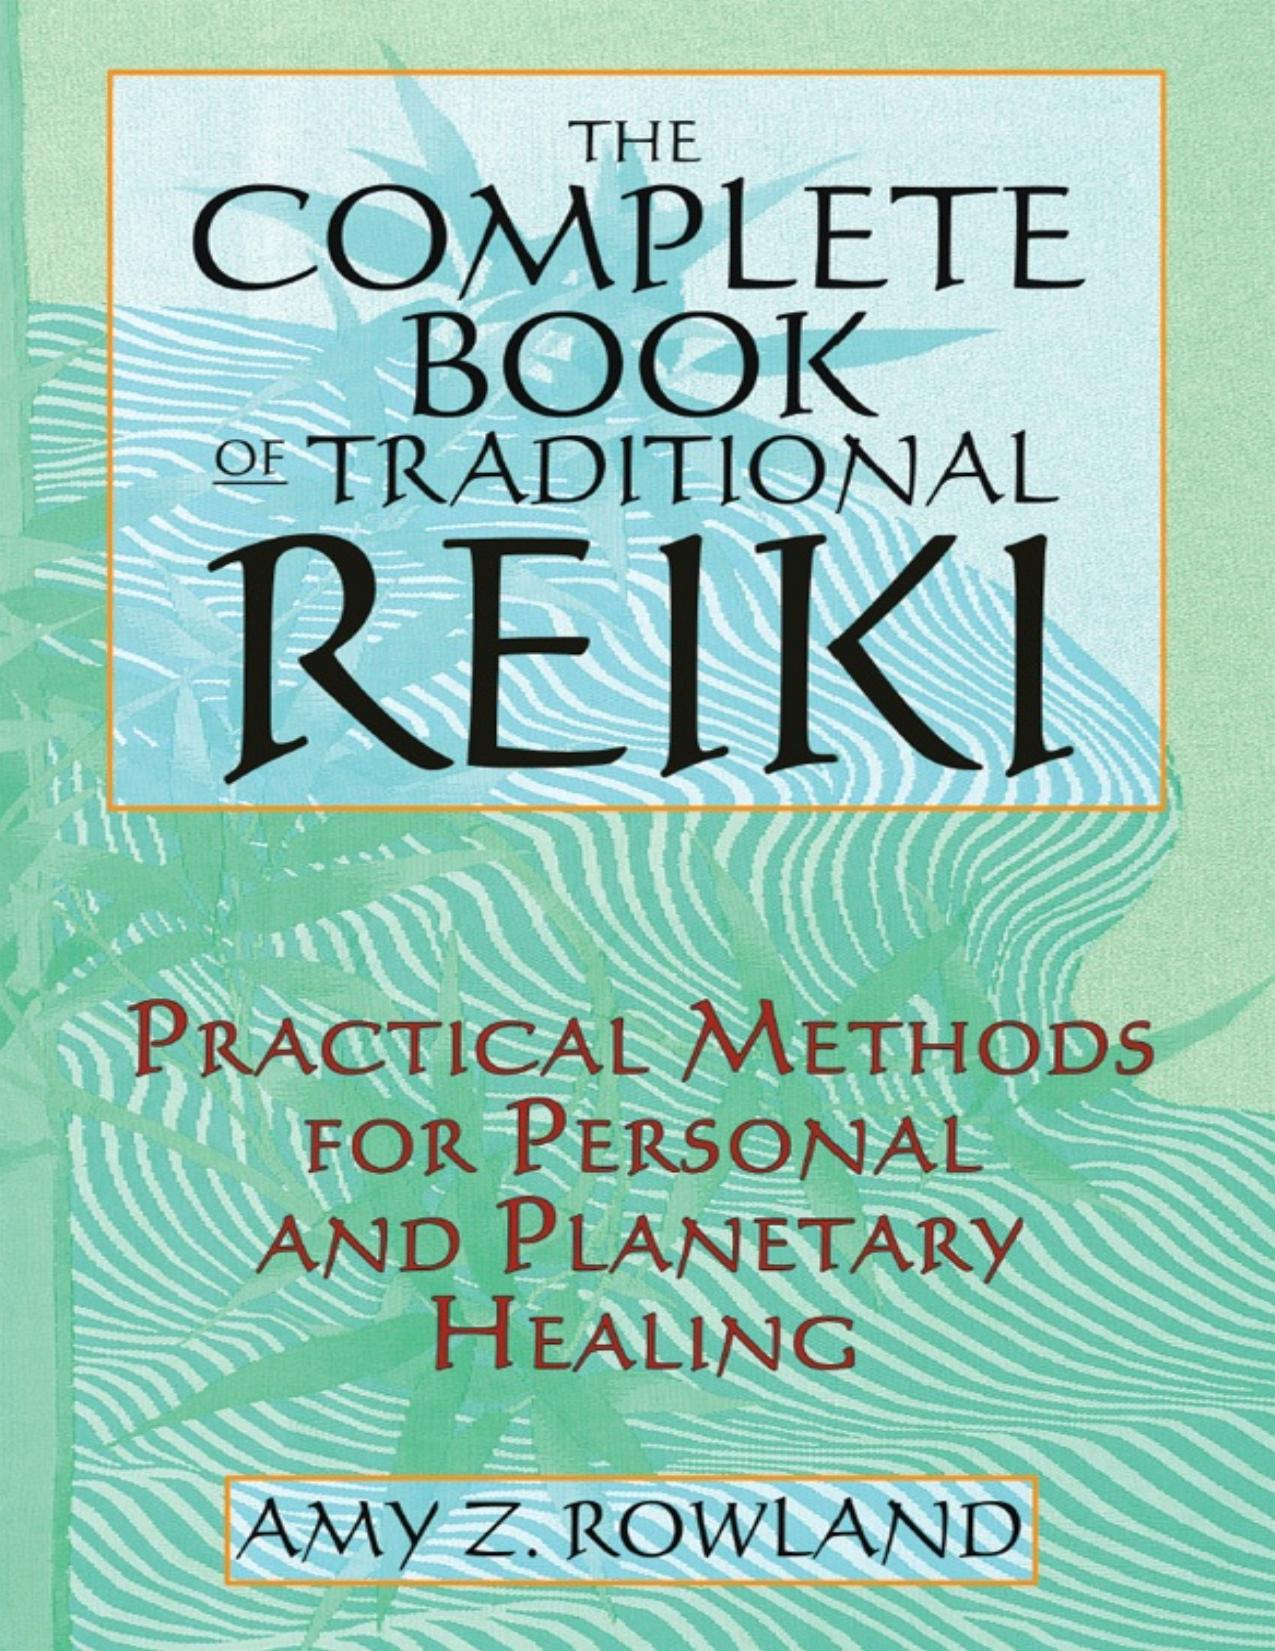 The Complete Book of Traditional Reiki: Practical Methods for Personal and Planetary Healing - PDFDrive.com